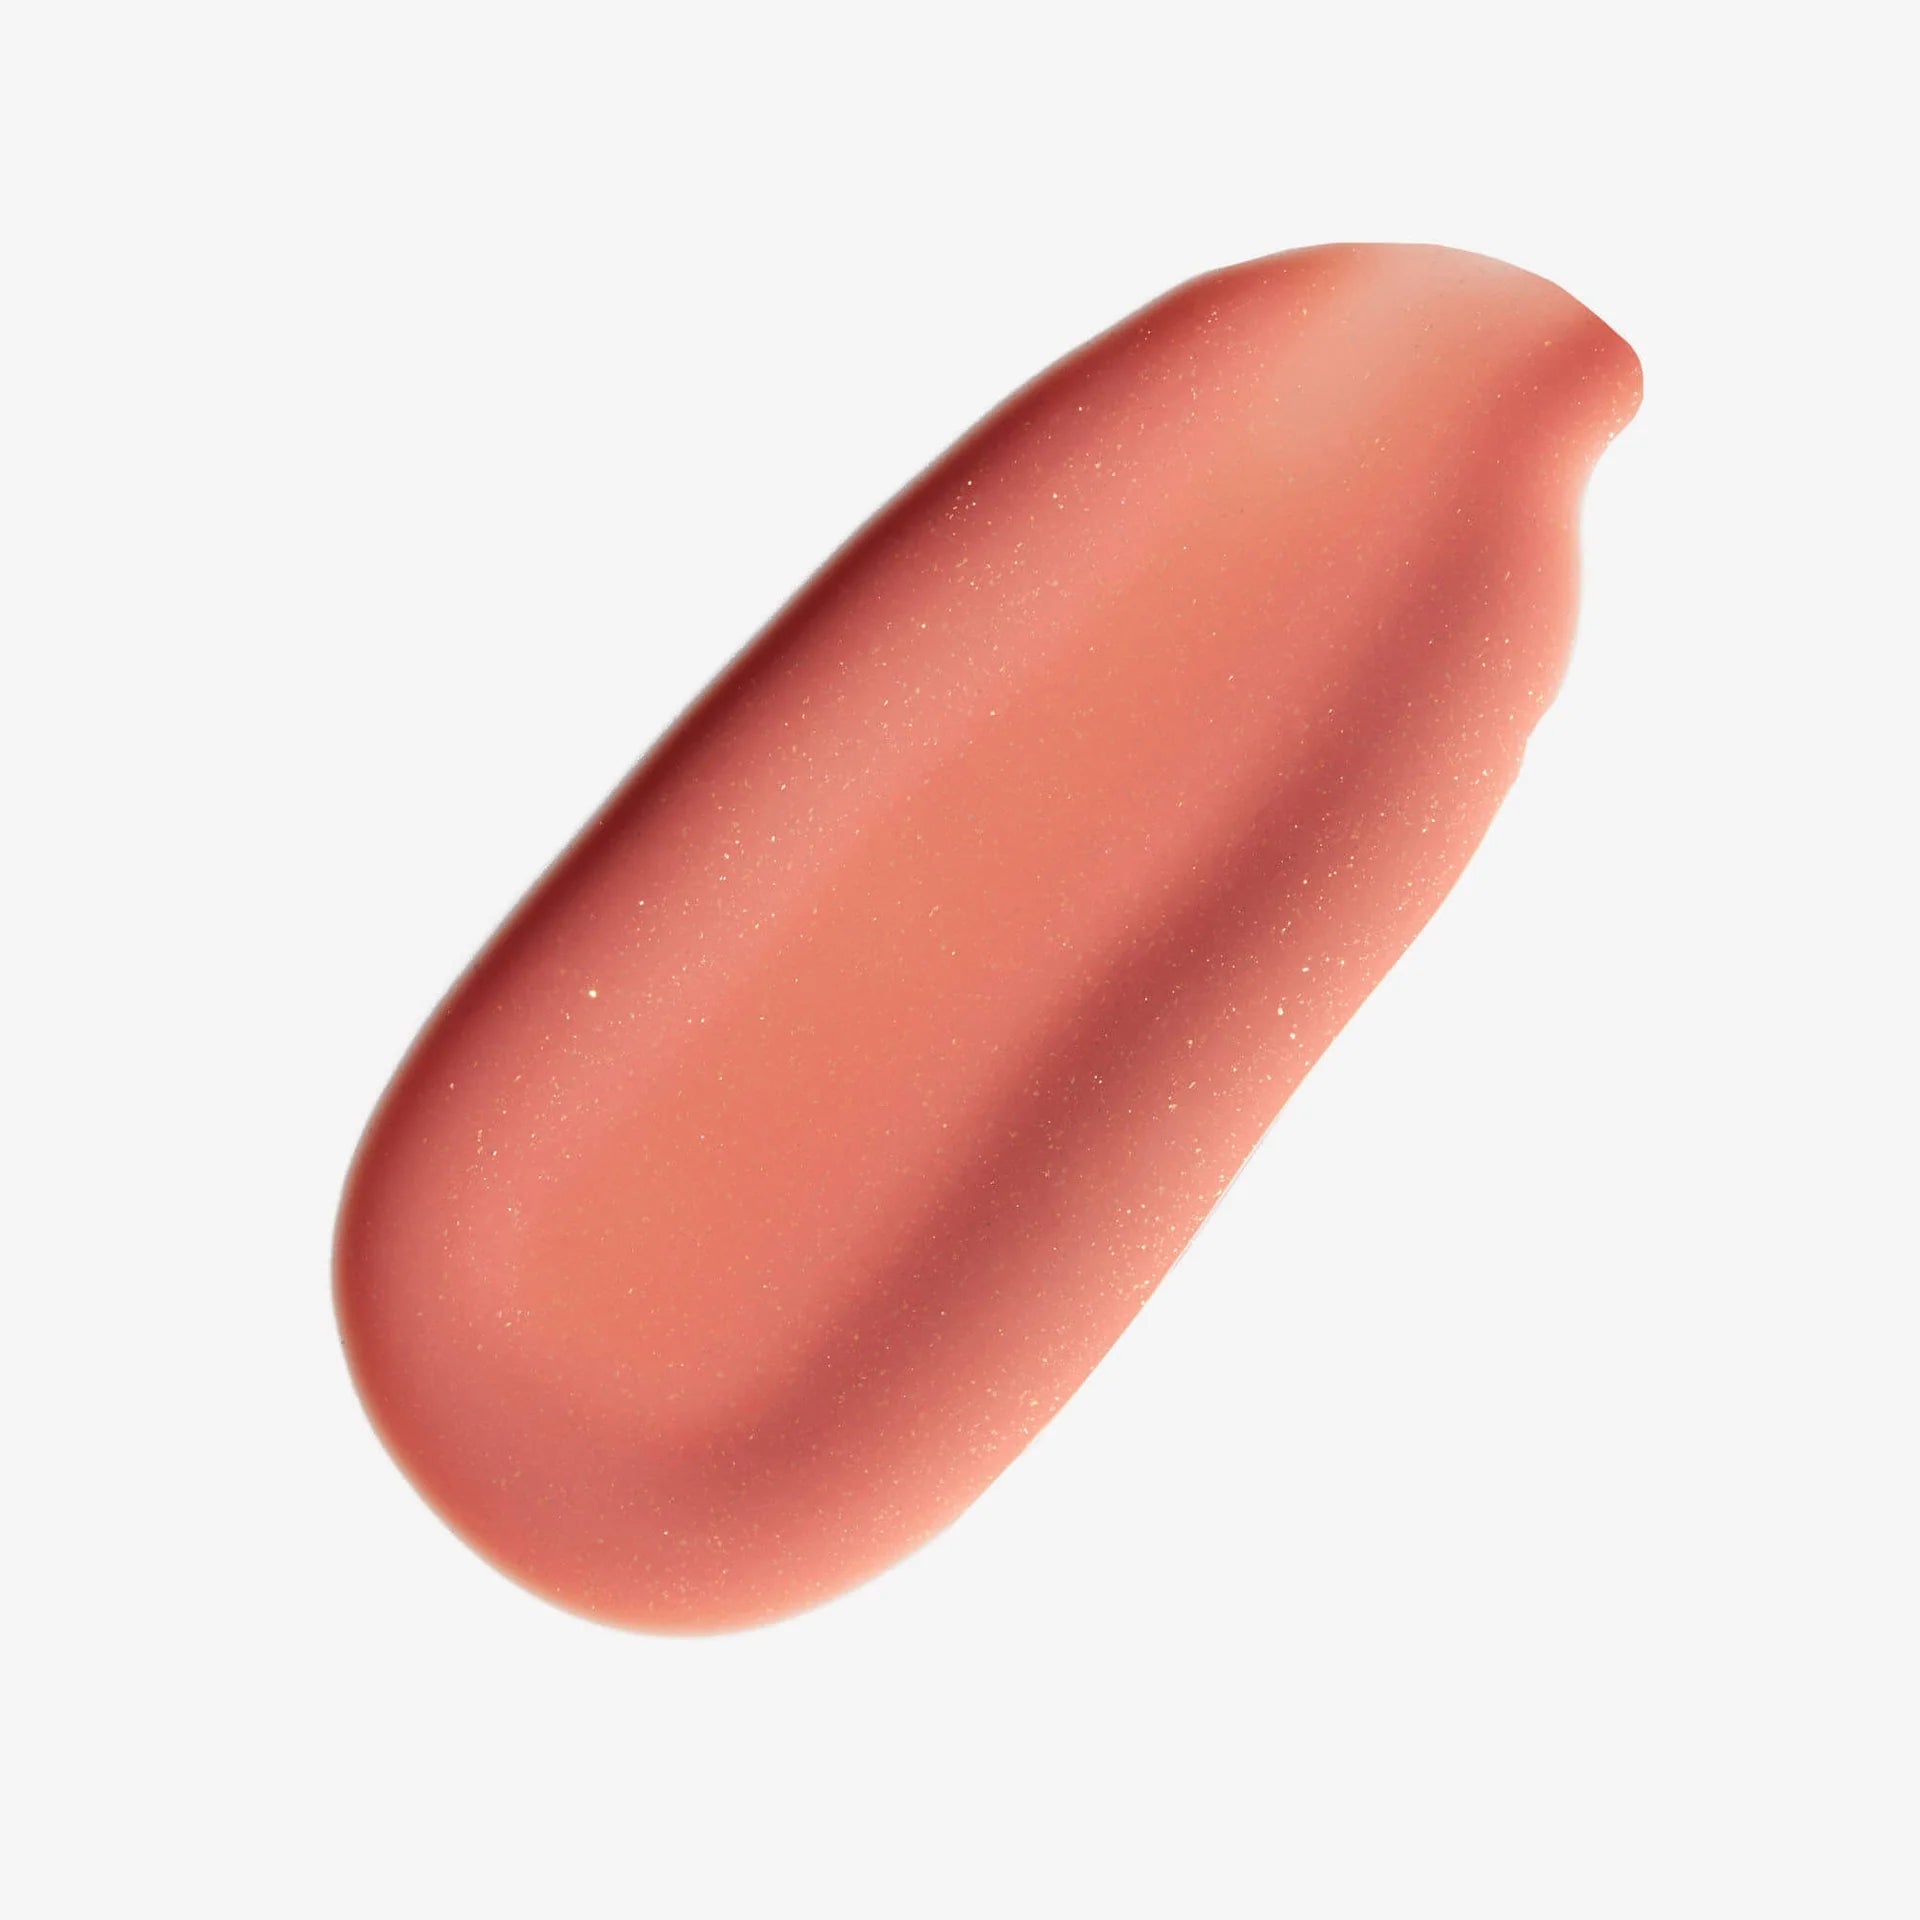 Toffee |Lip Gloss Swatch Shade Toffee